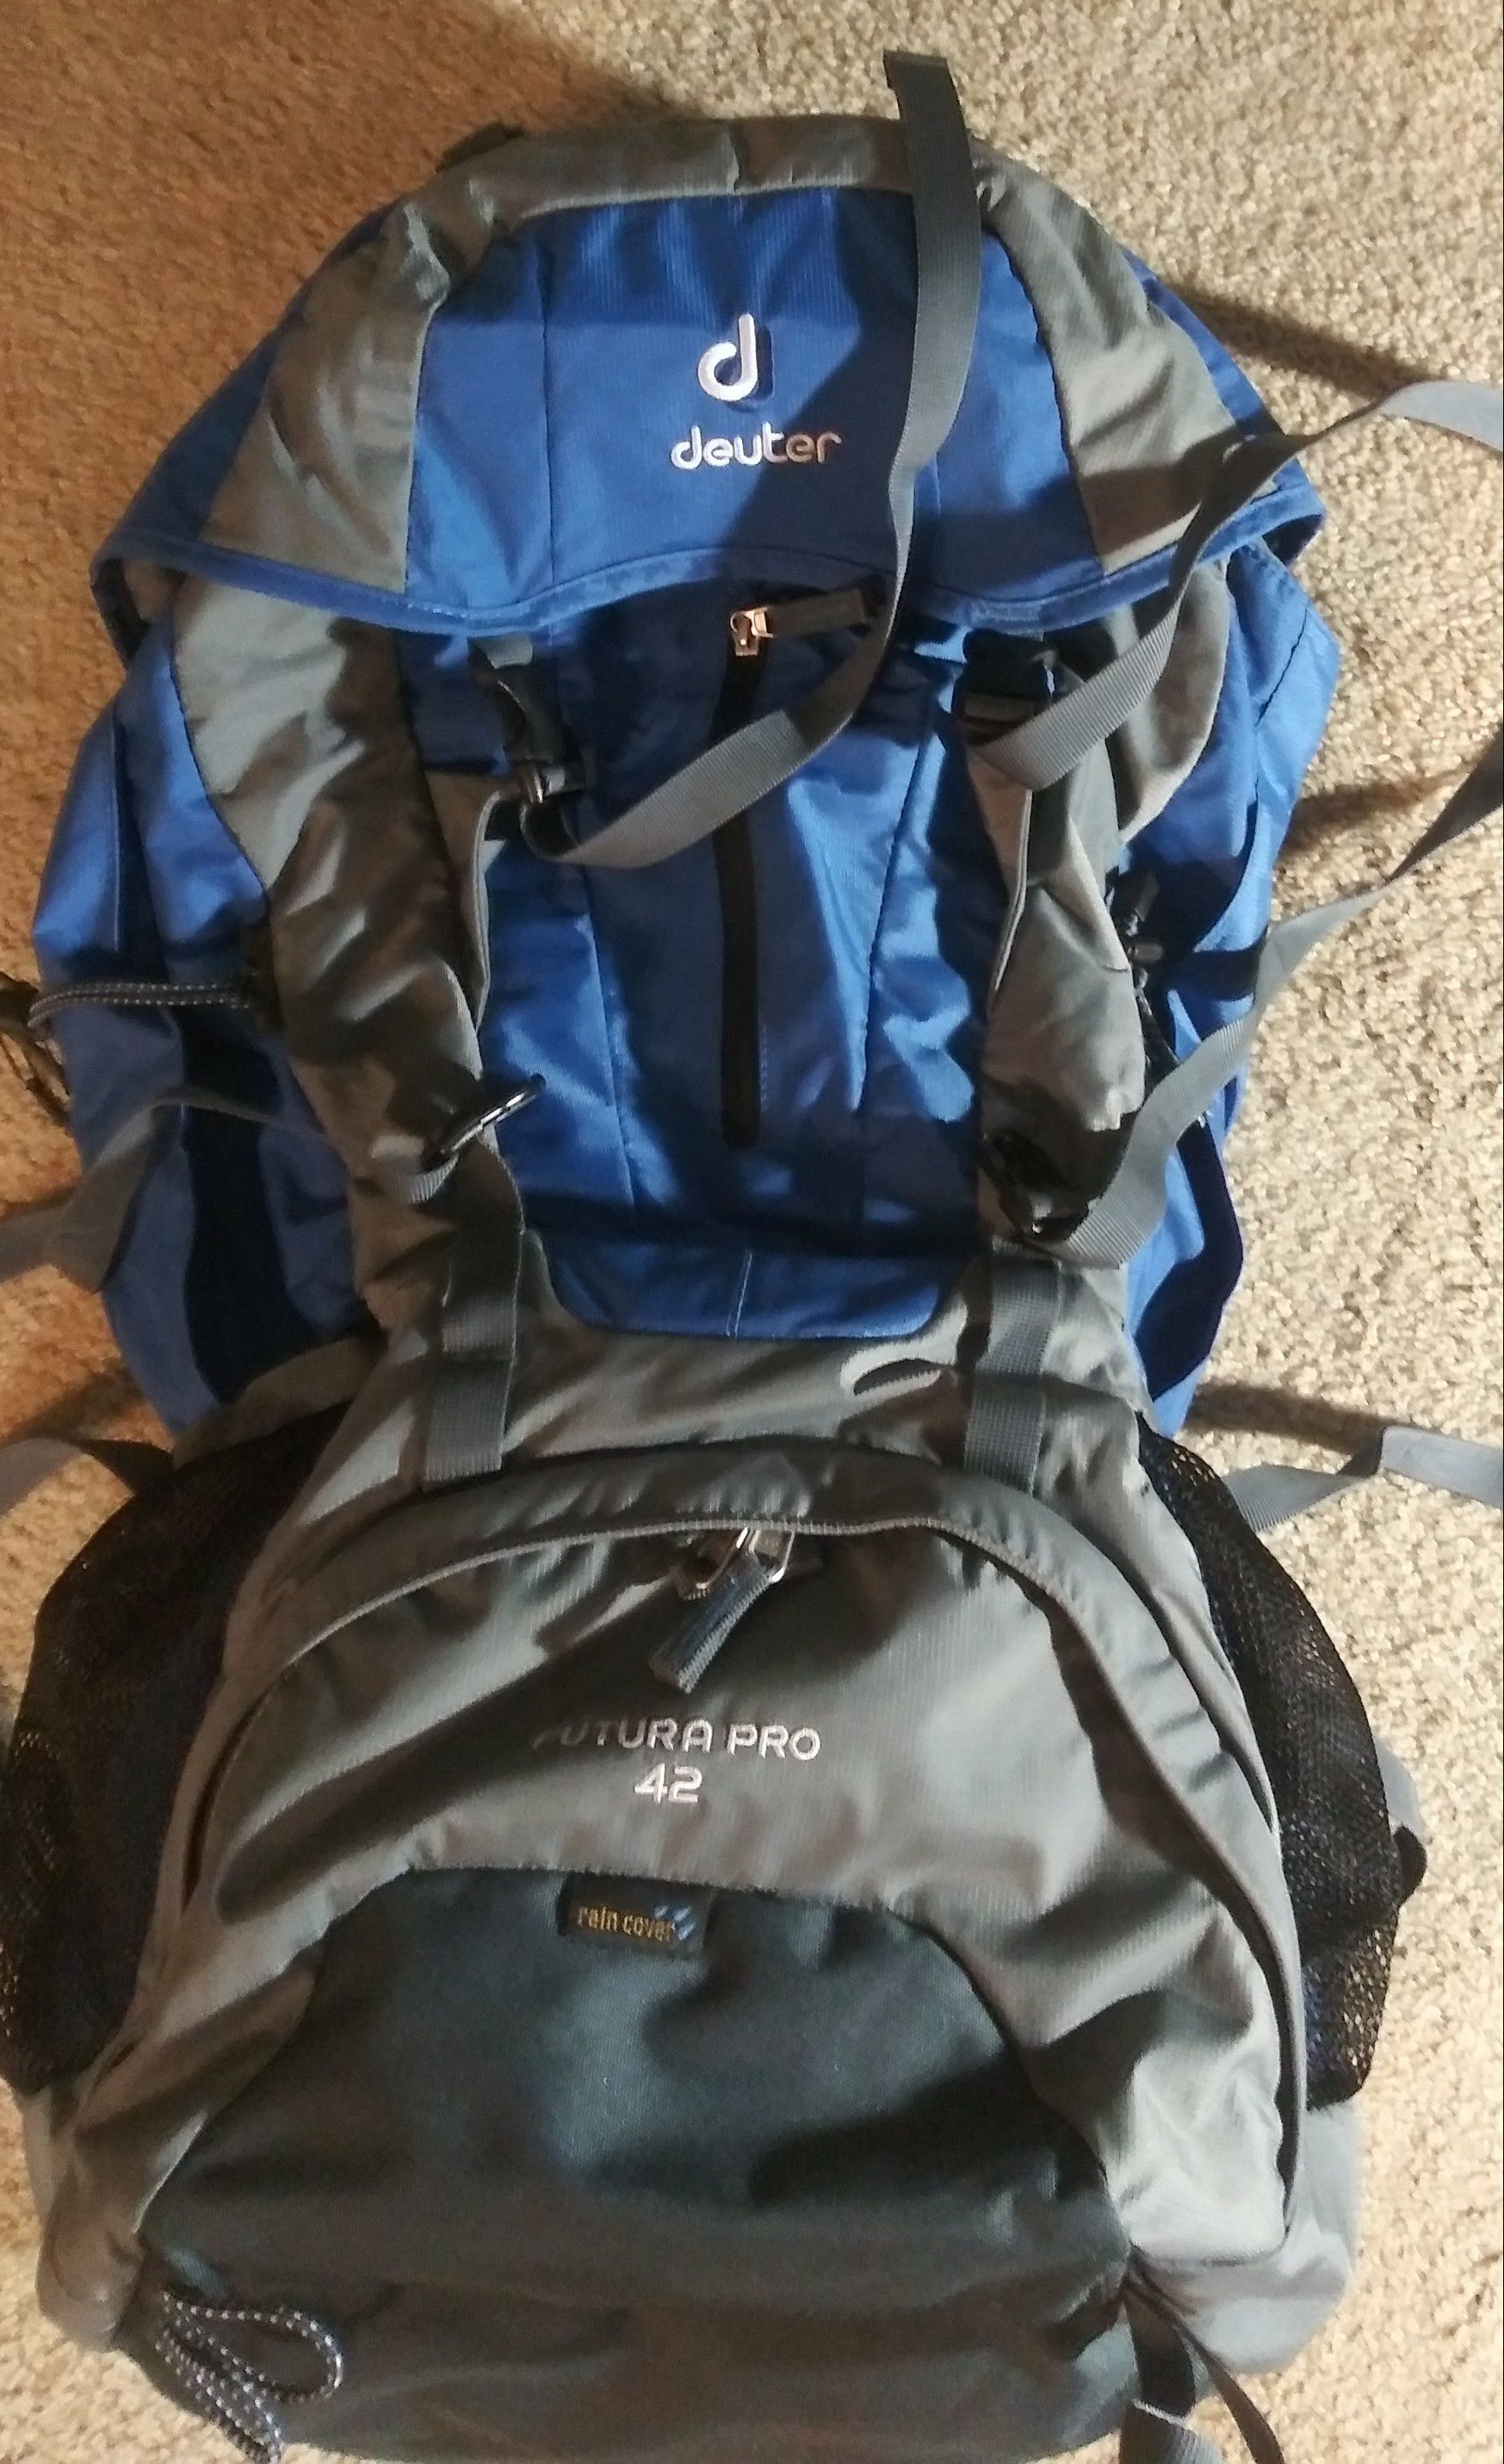 DEUTER Futura Pro 42 backpack excellent condition with rain cover